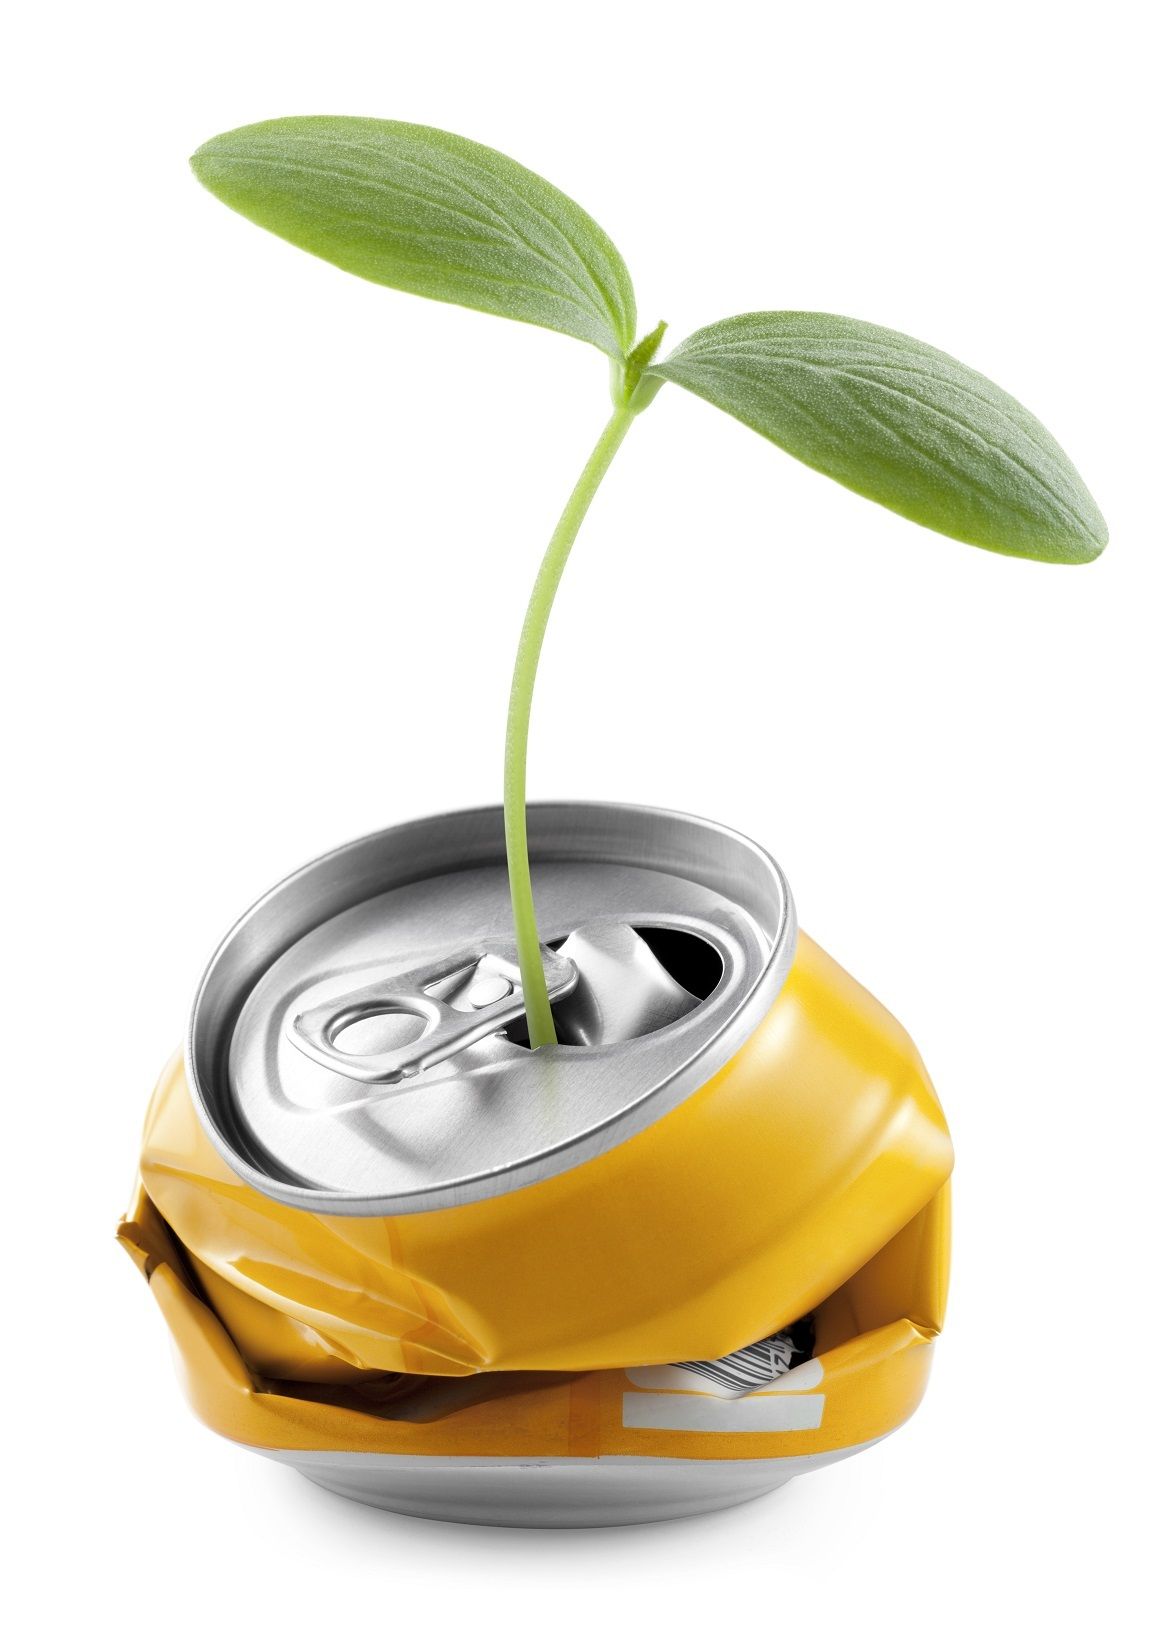 Deposit can with plant